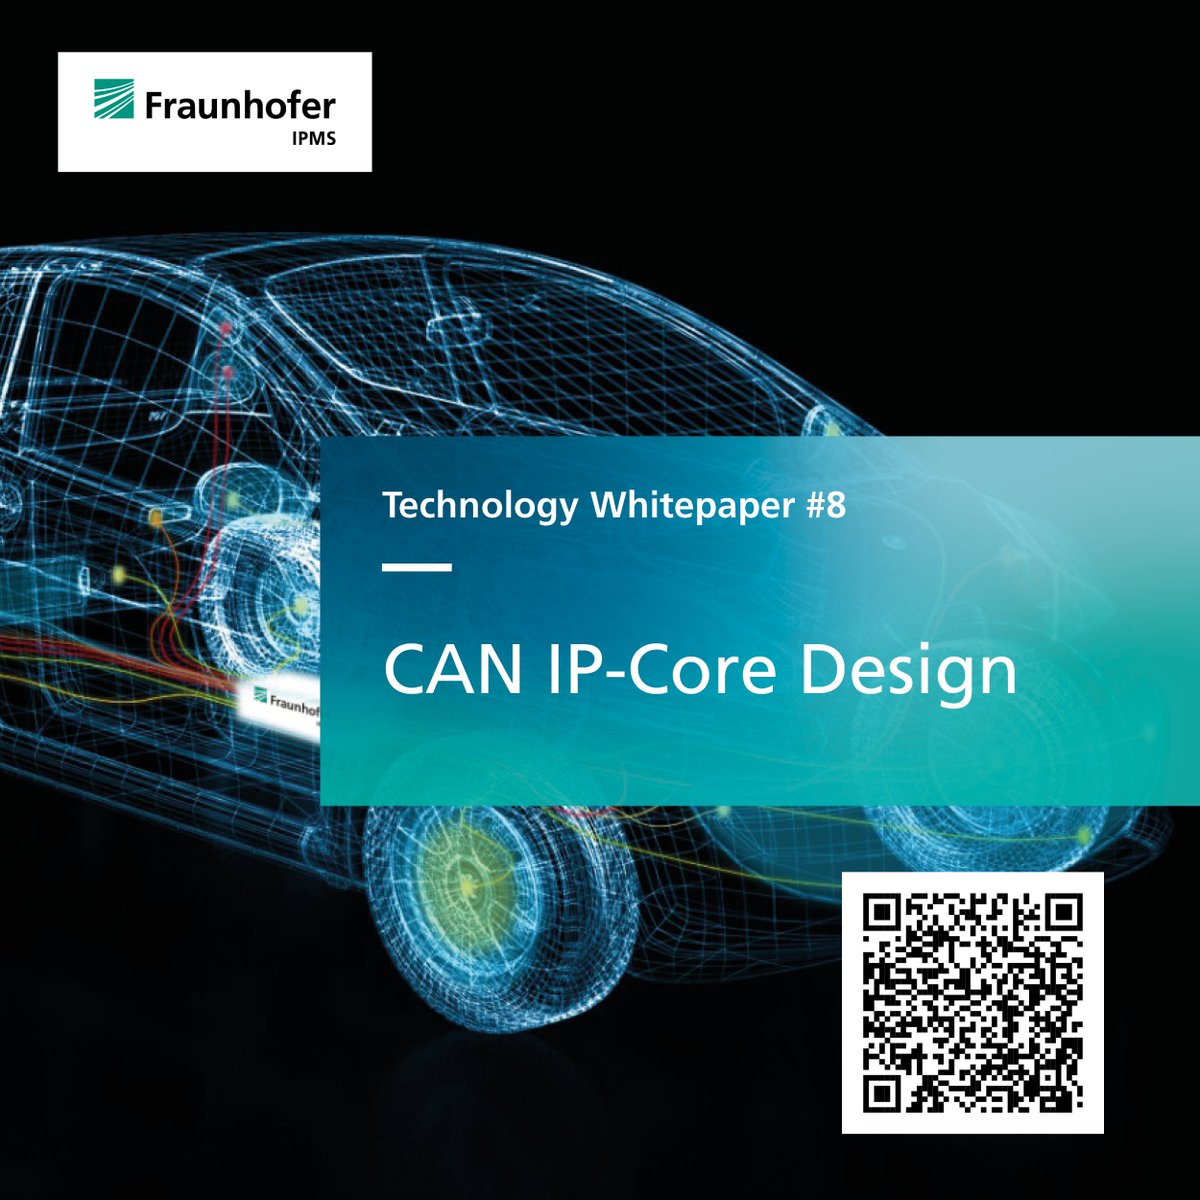 The influence of #technological trends demands new architectural concepts for #electronics. With #CAN, a communication #protocol with high robustness & flexibility was found. For those interested, we can recommend our #Whitepaper 'CAN #IPCore Design': ipms.fraunhofer.de/de/press-media…